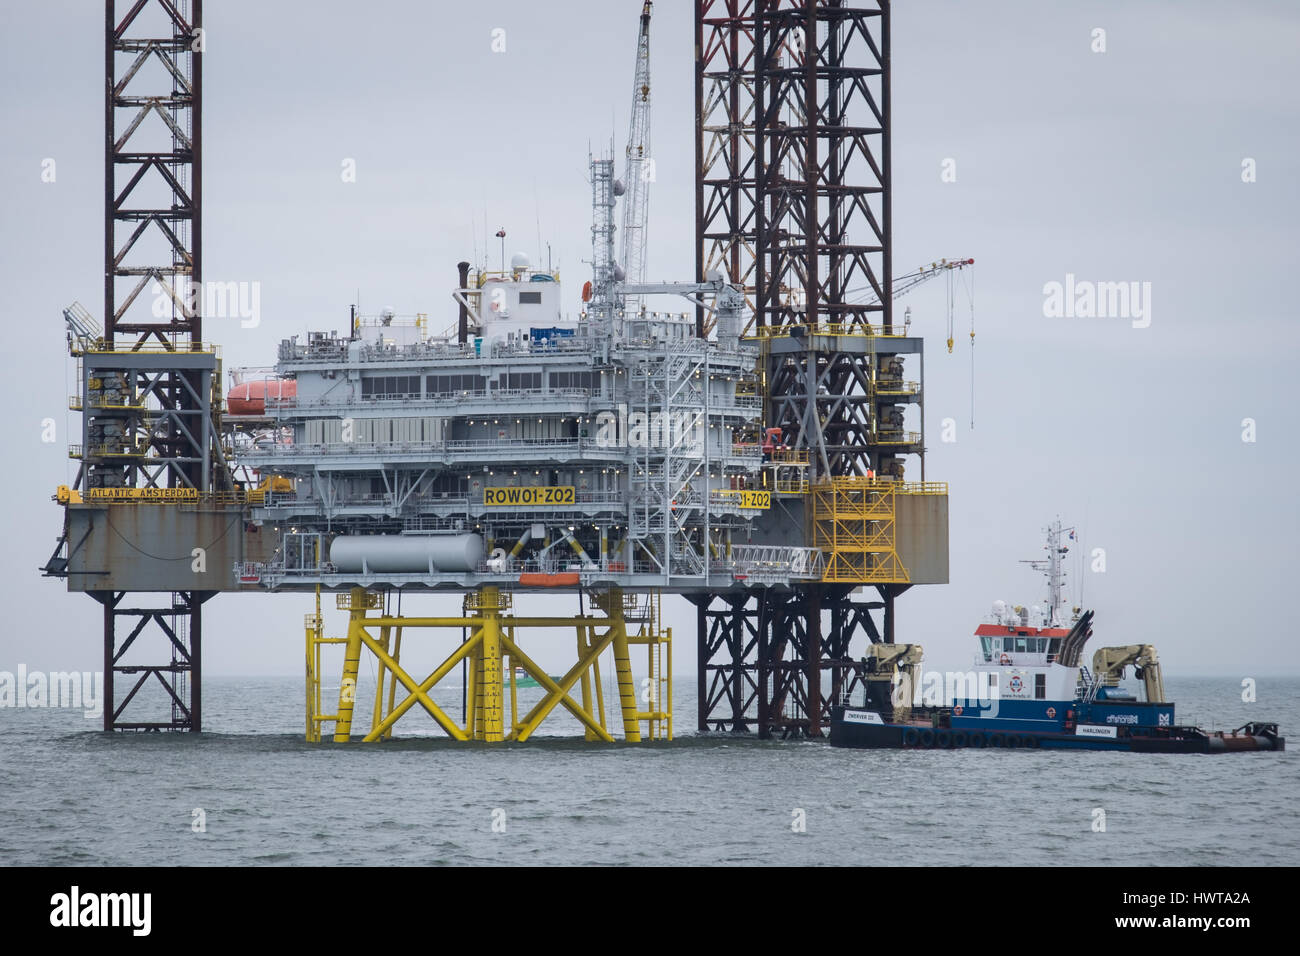 The Atlantic Amsterdam jacked up next to the first Race Bank Offshore Wind Farm (ROW01-Z02) substation during the 2017 construction phase. Stock Photo